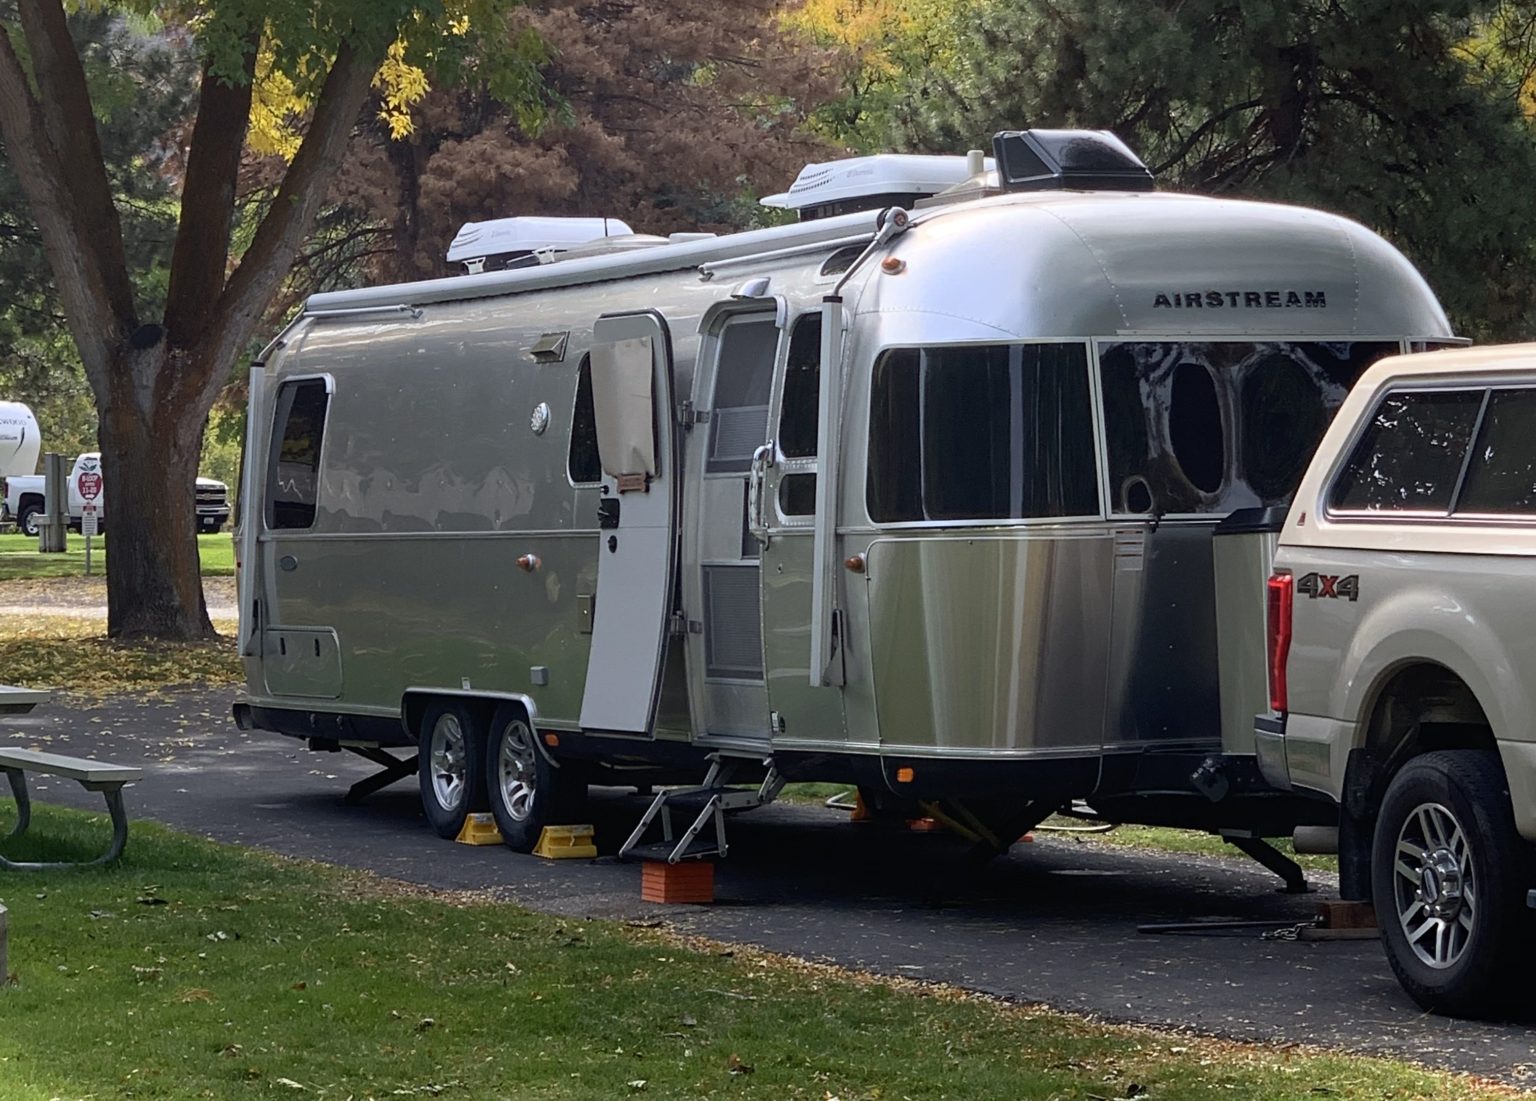 2017 Airstream 30ft Classic For Sale In Fort Worth Airstream Marketplace